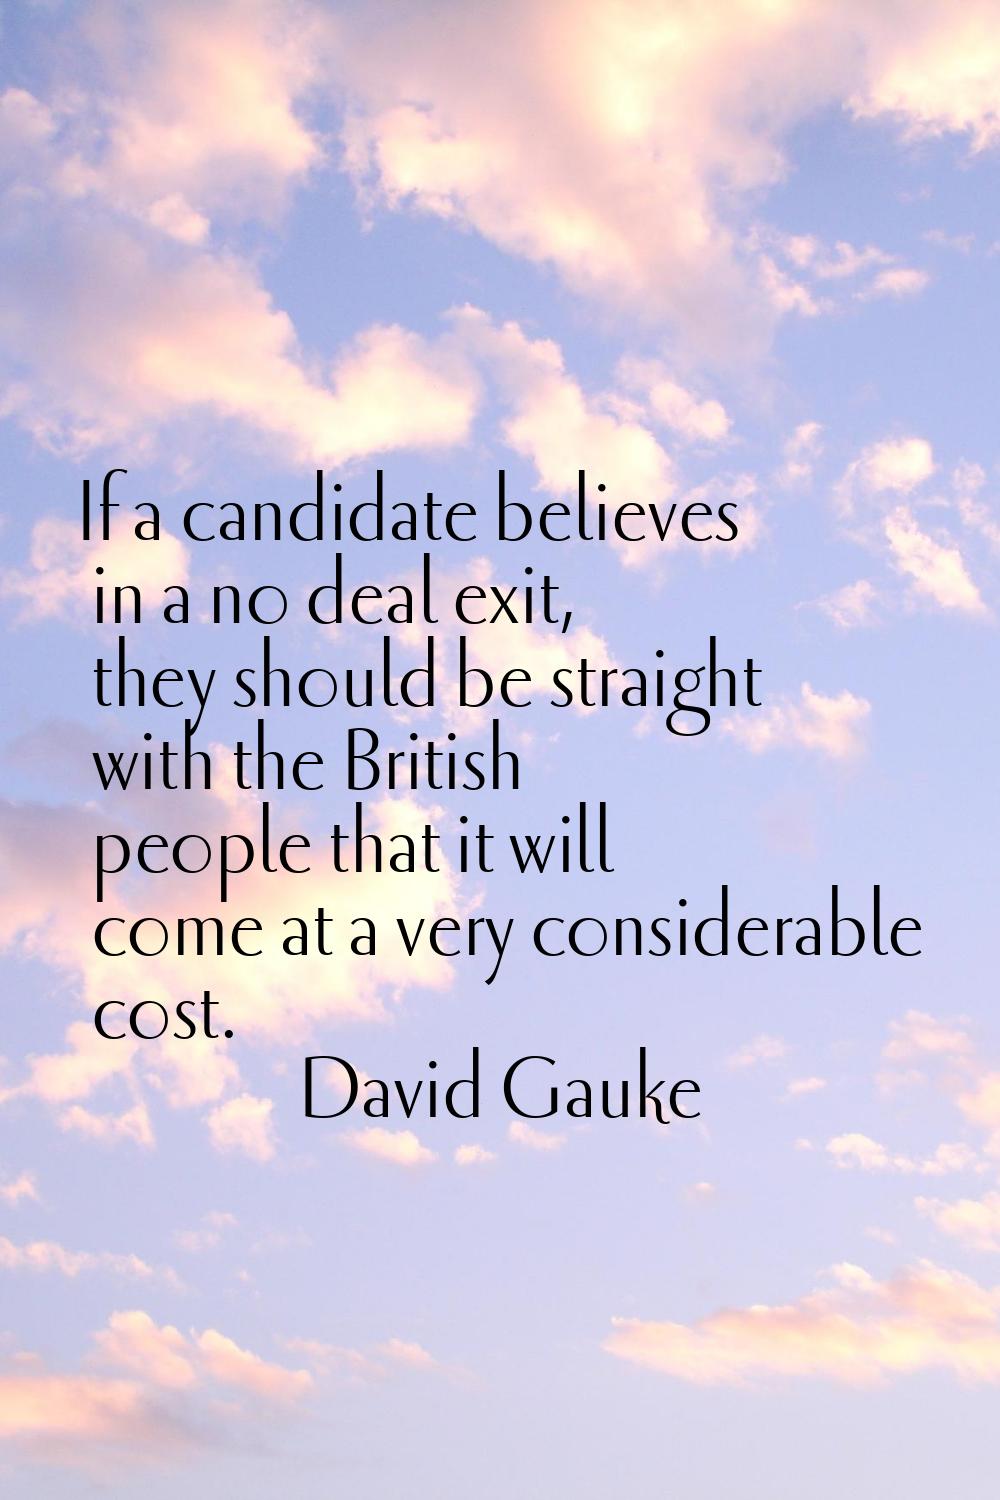 If a candidate believes in a no deal exit, they should be straight with the British people that it 